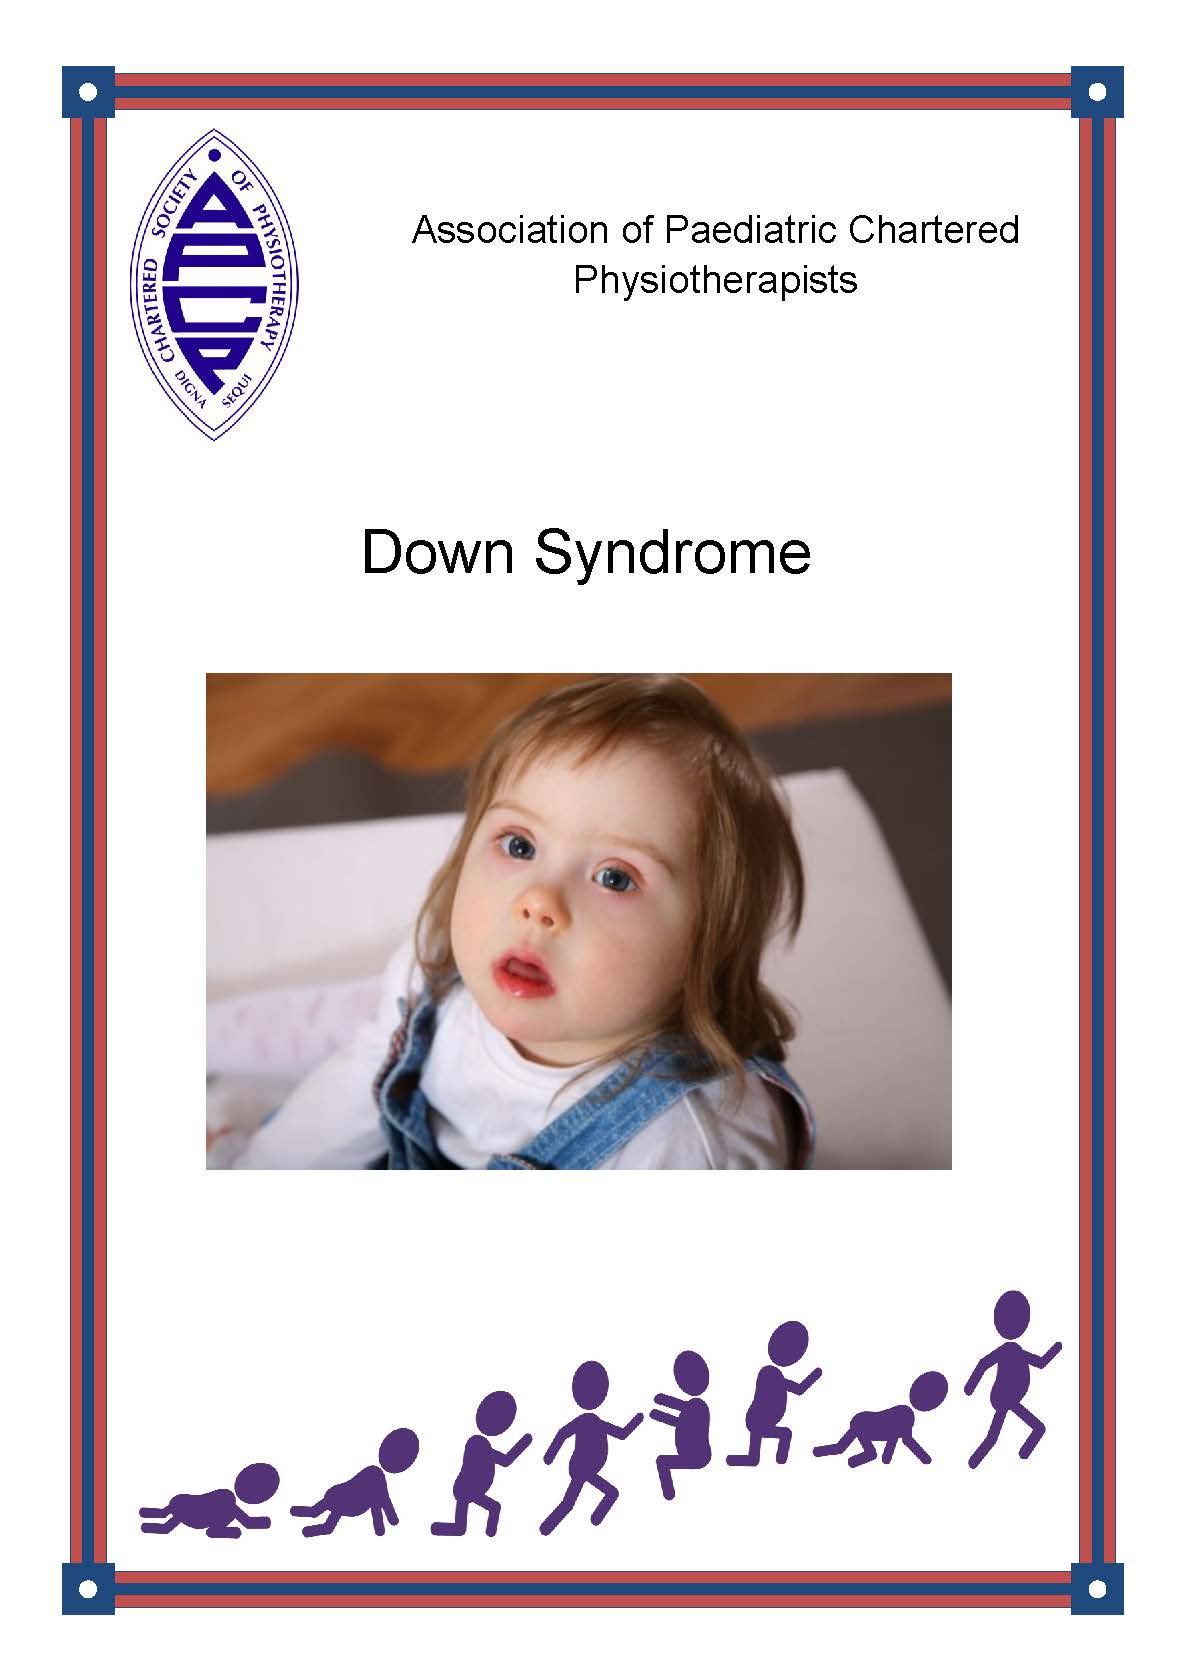 Down Syndrome Leaflet | Association of Paediatric Chartered ...